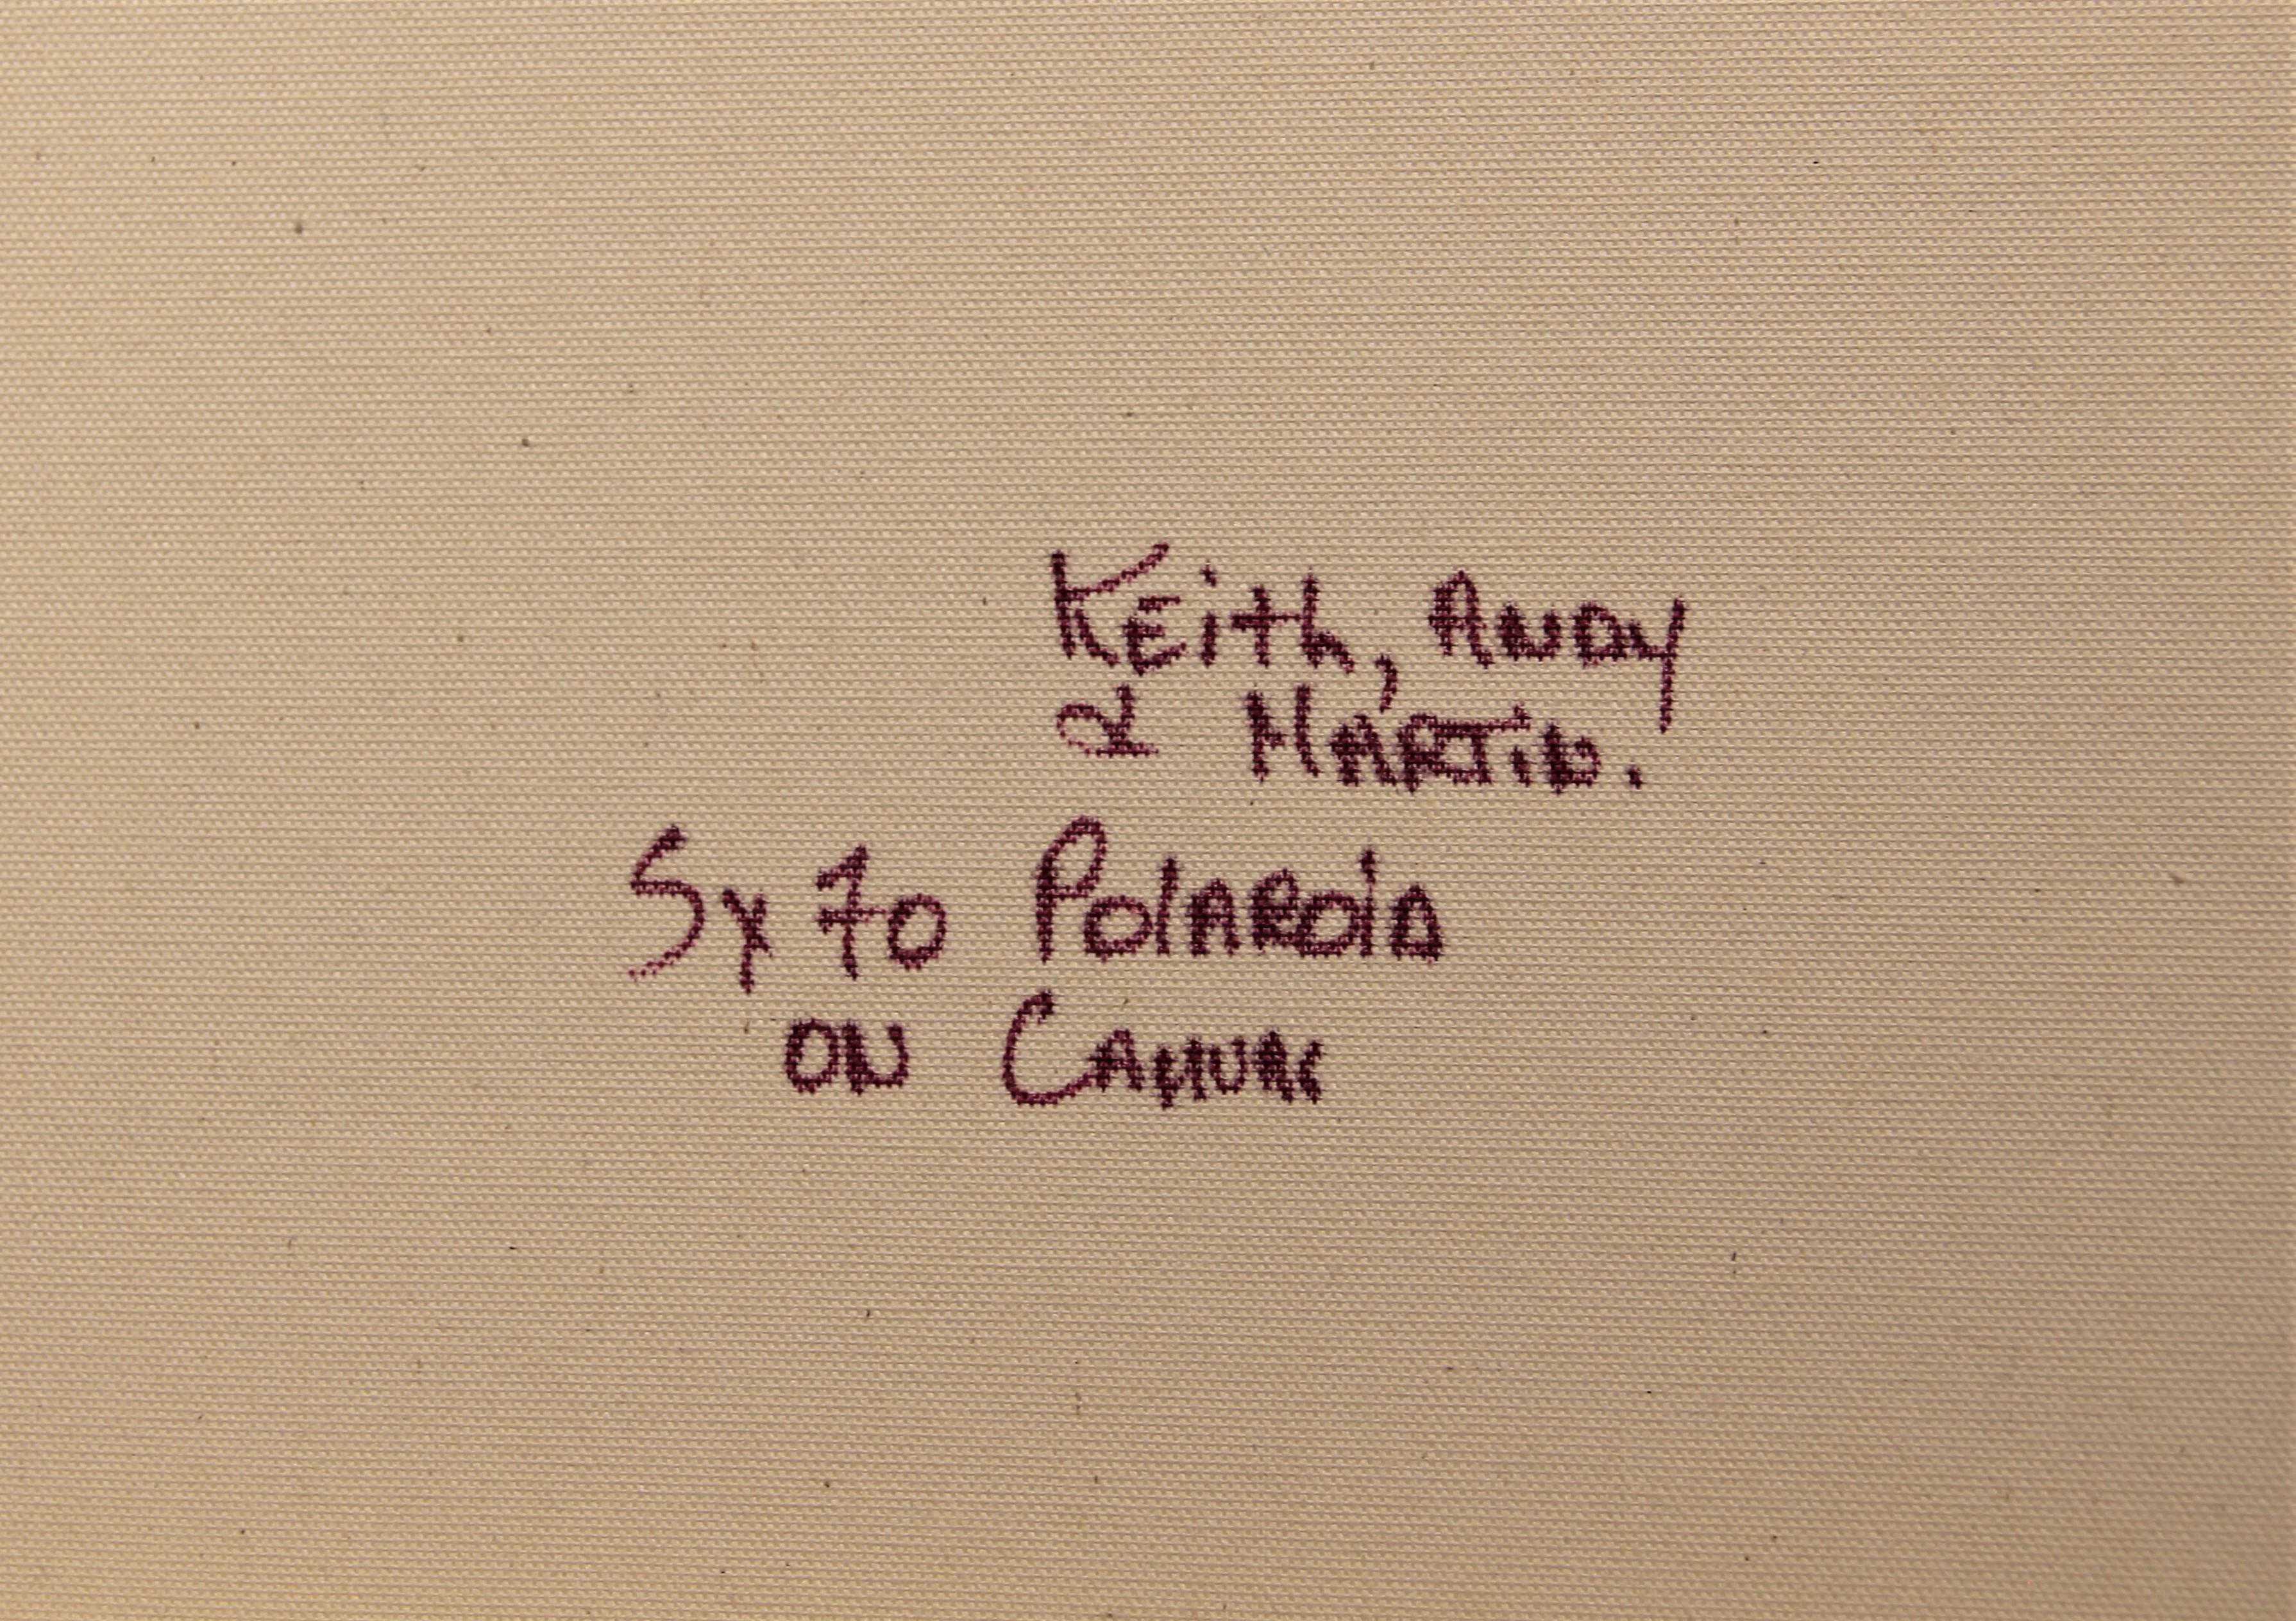 Casual polaroid portrait of Keith Haring, Andy Warhol, and Martin Burgoyne printed on canvas by Maripol. Signed by artist on the lower back portion of canvas. Currently unframed but options are available.

Artist Biography: Maripol has been